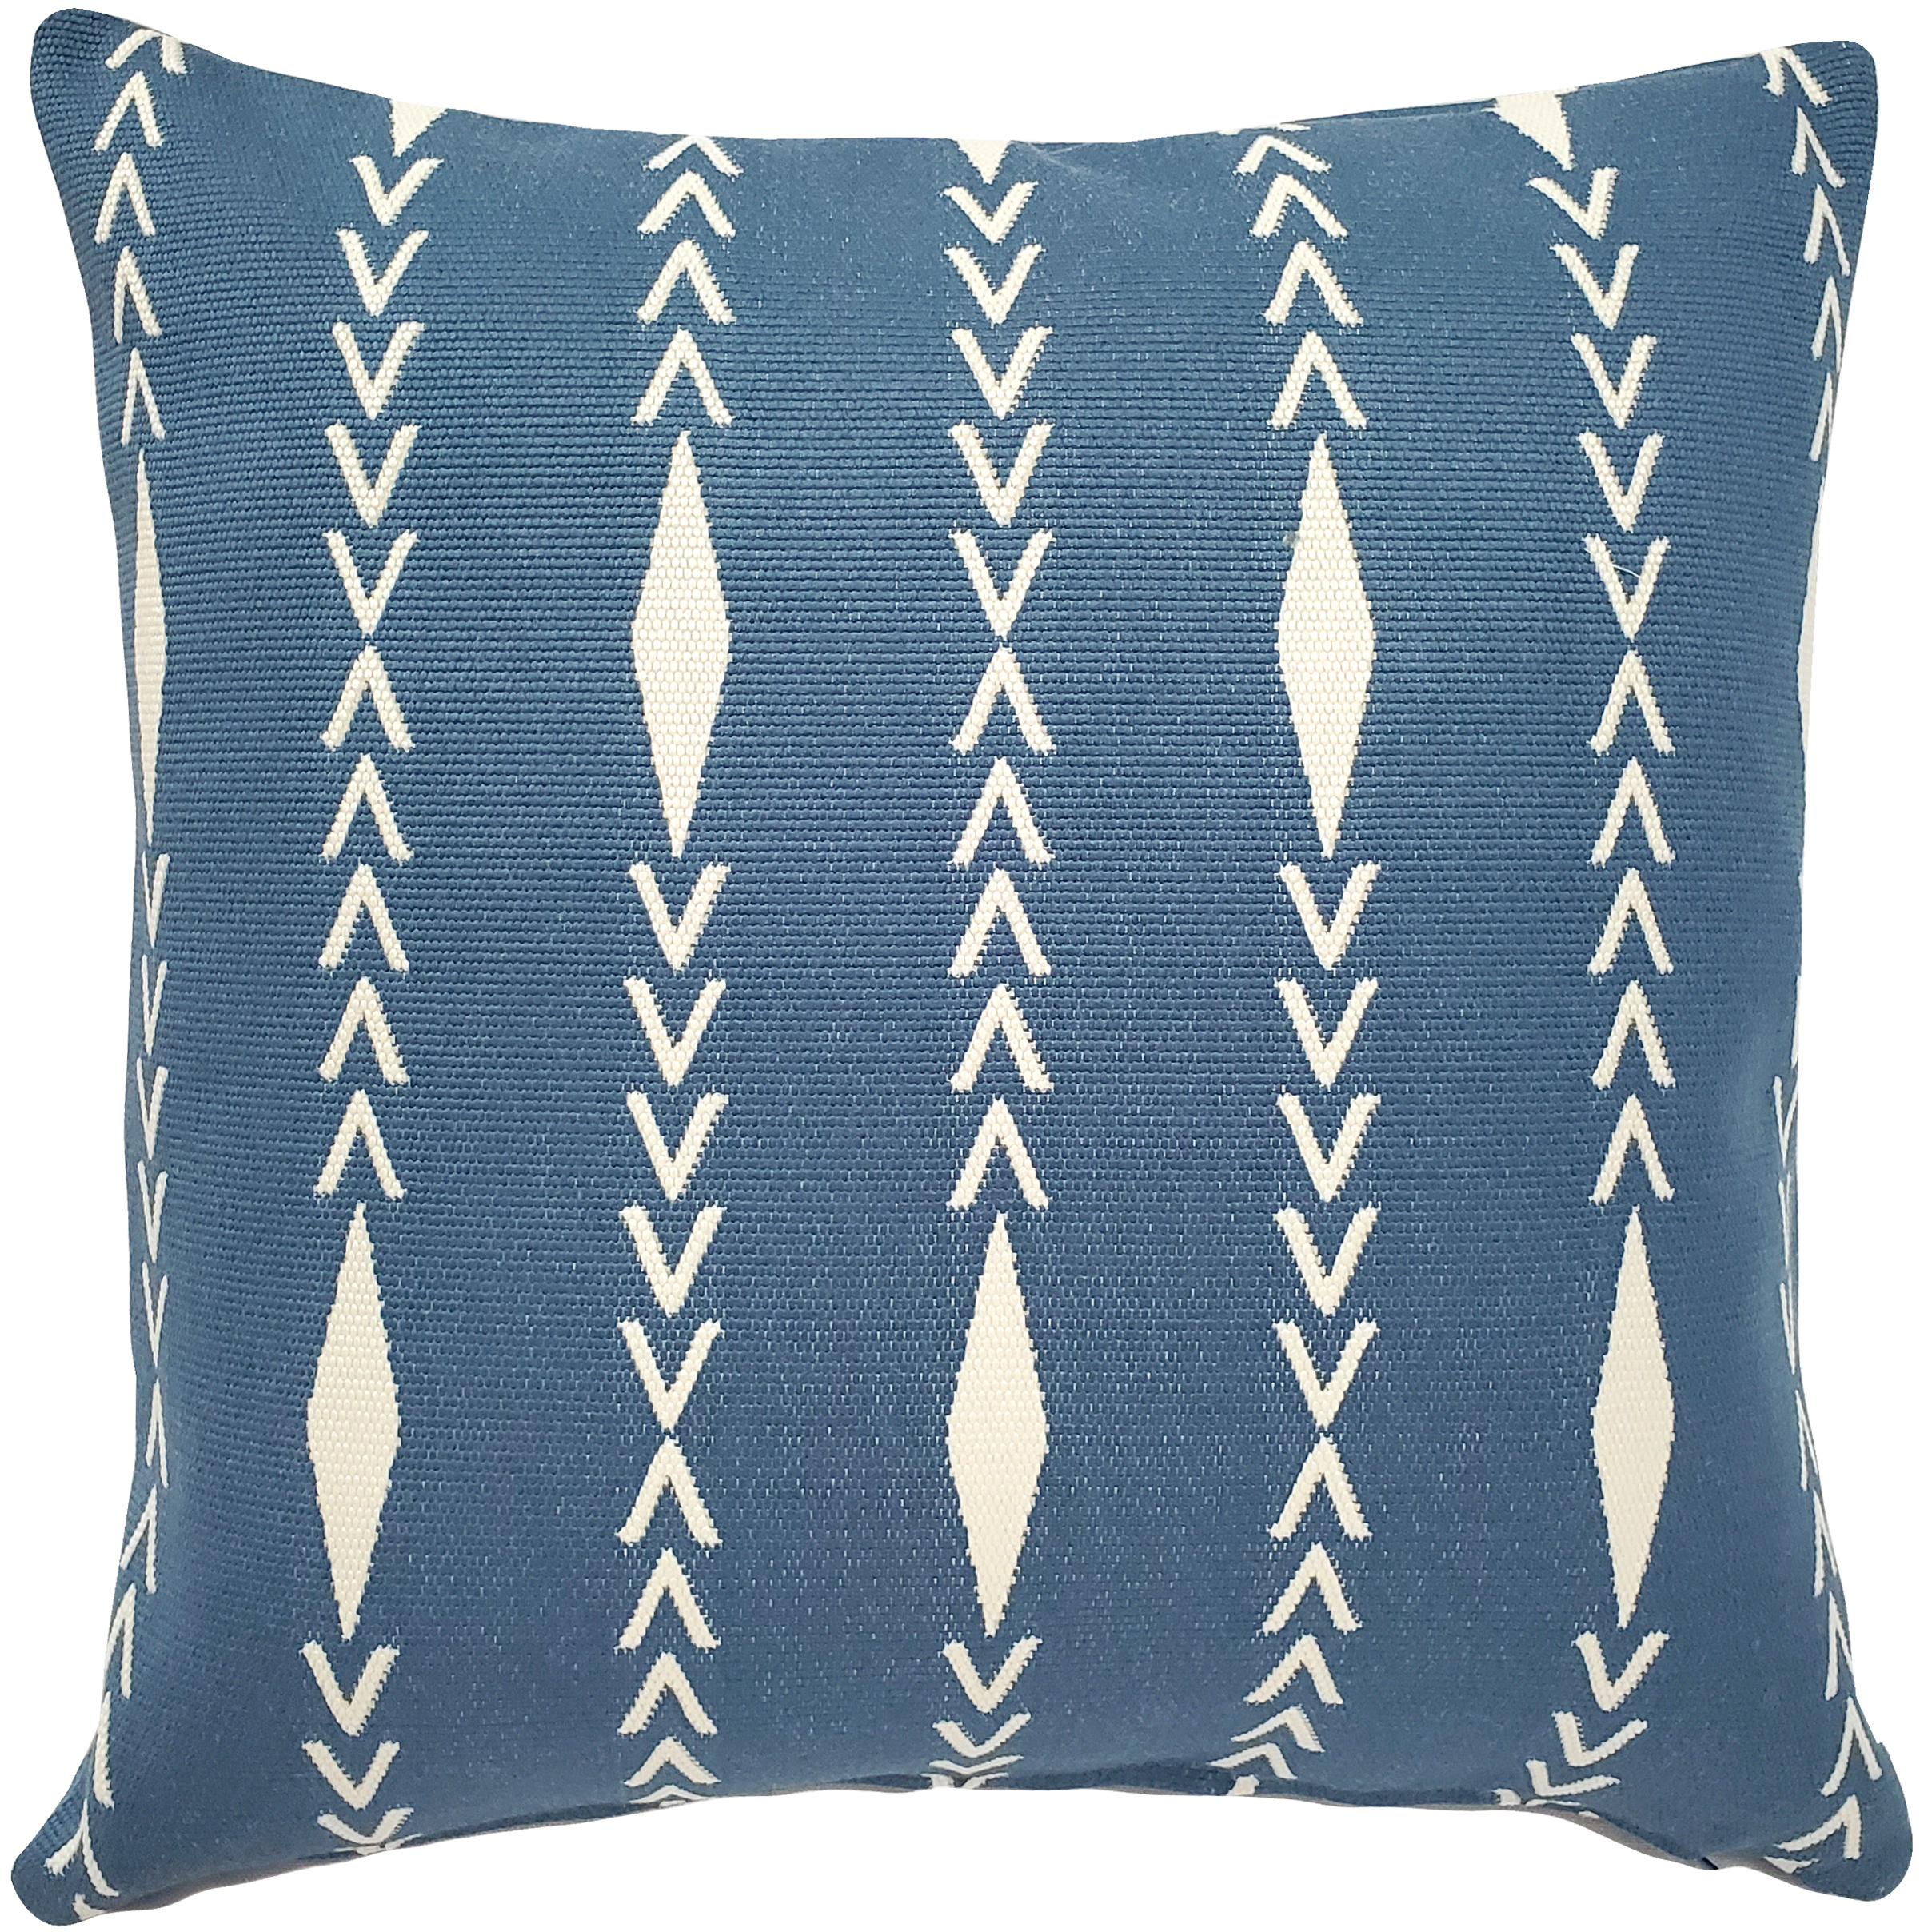 Diamond Ray Mineral Blue Throw Pillow 20x20, With Polyfill Insert